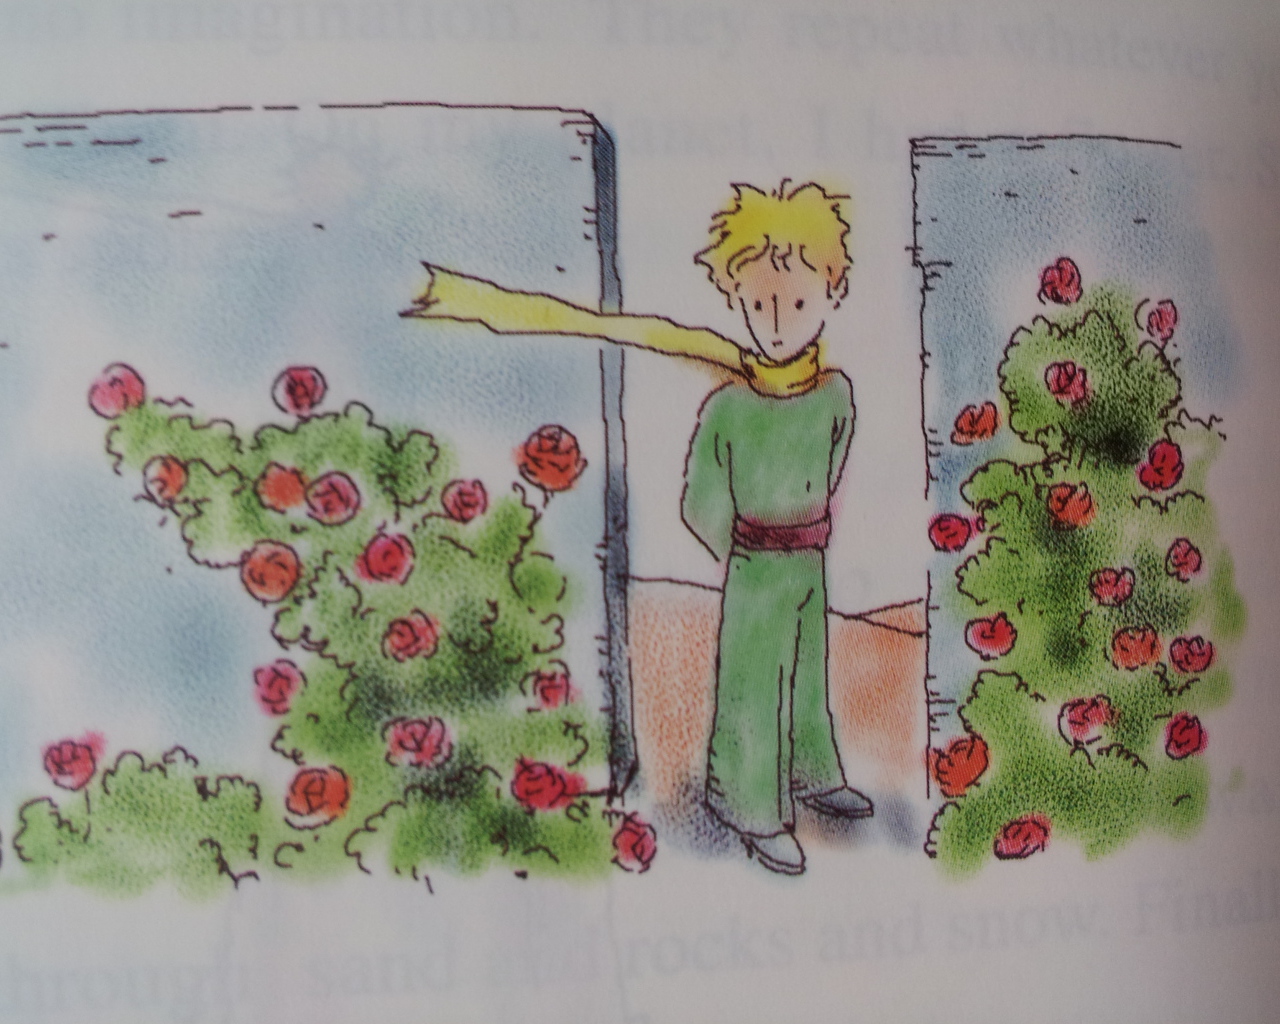 Adventures of the little prince